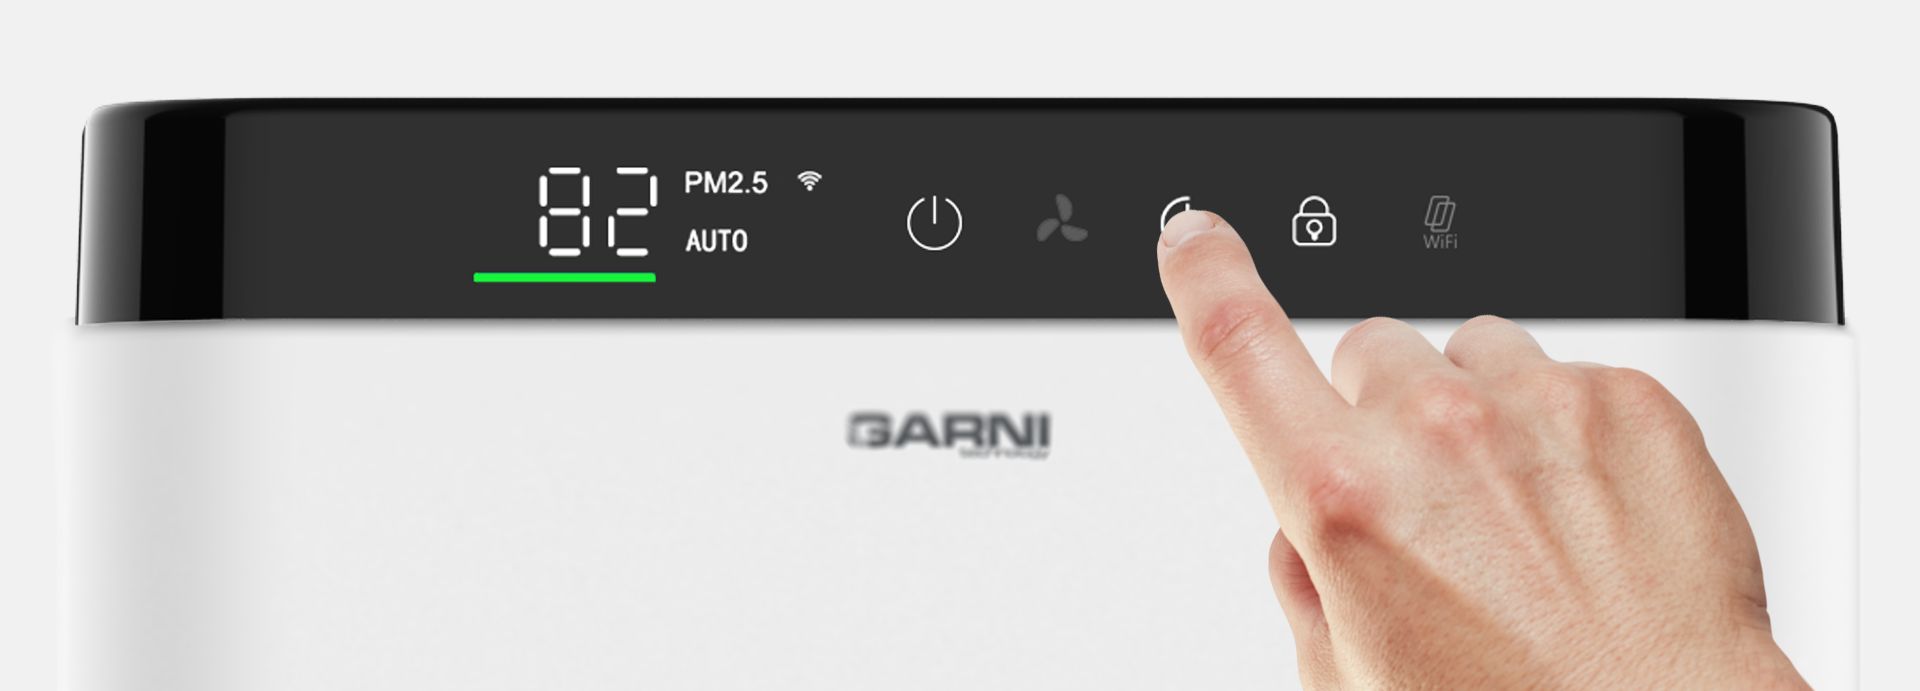 Easy-to-read display and touch buttons GARNI 15T OneCare